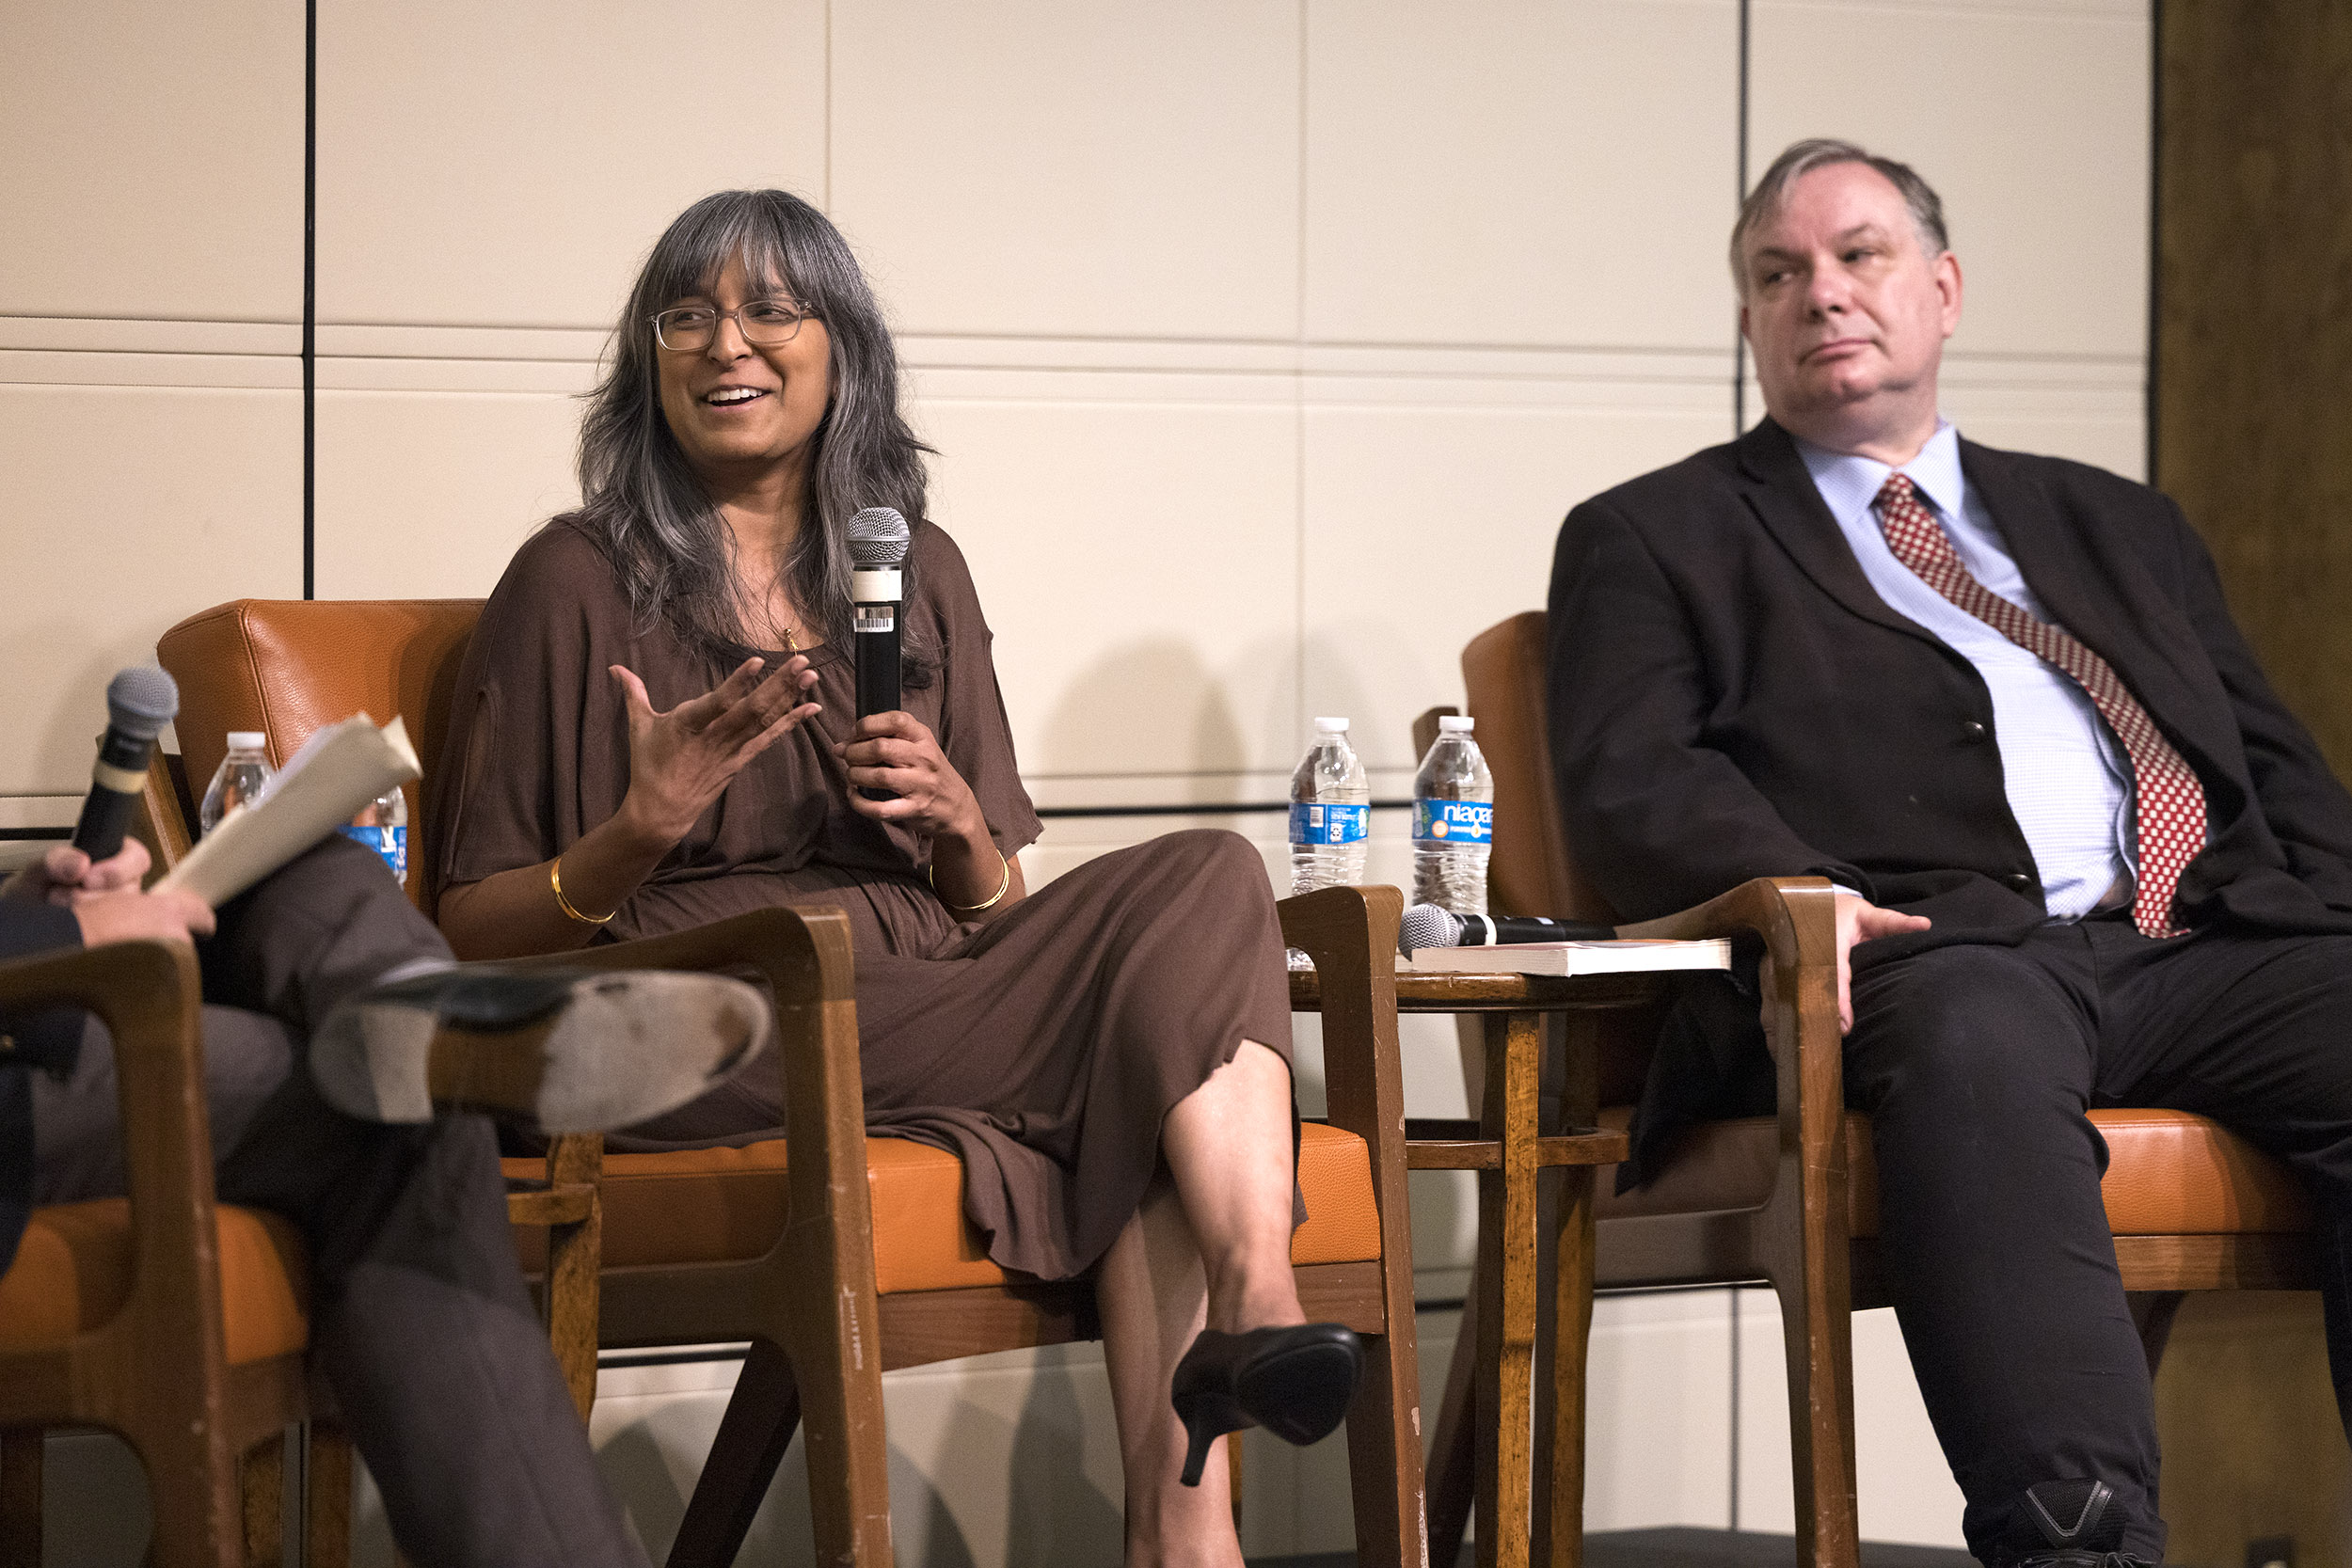 John Fund and Gowri Ramachandran speaking at the Ath.